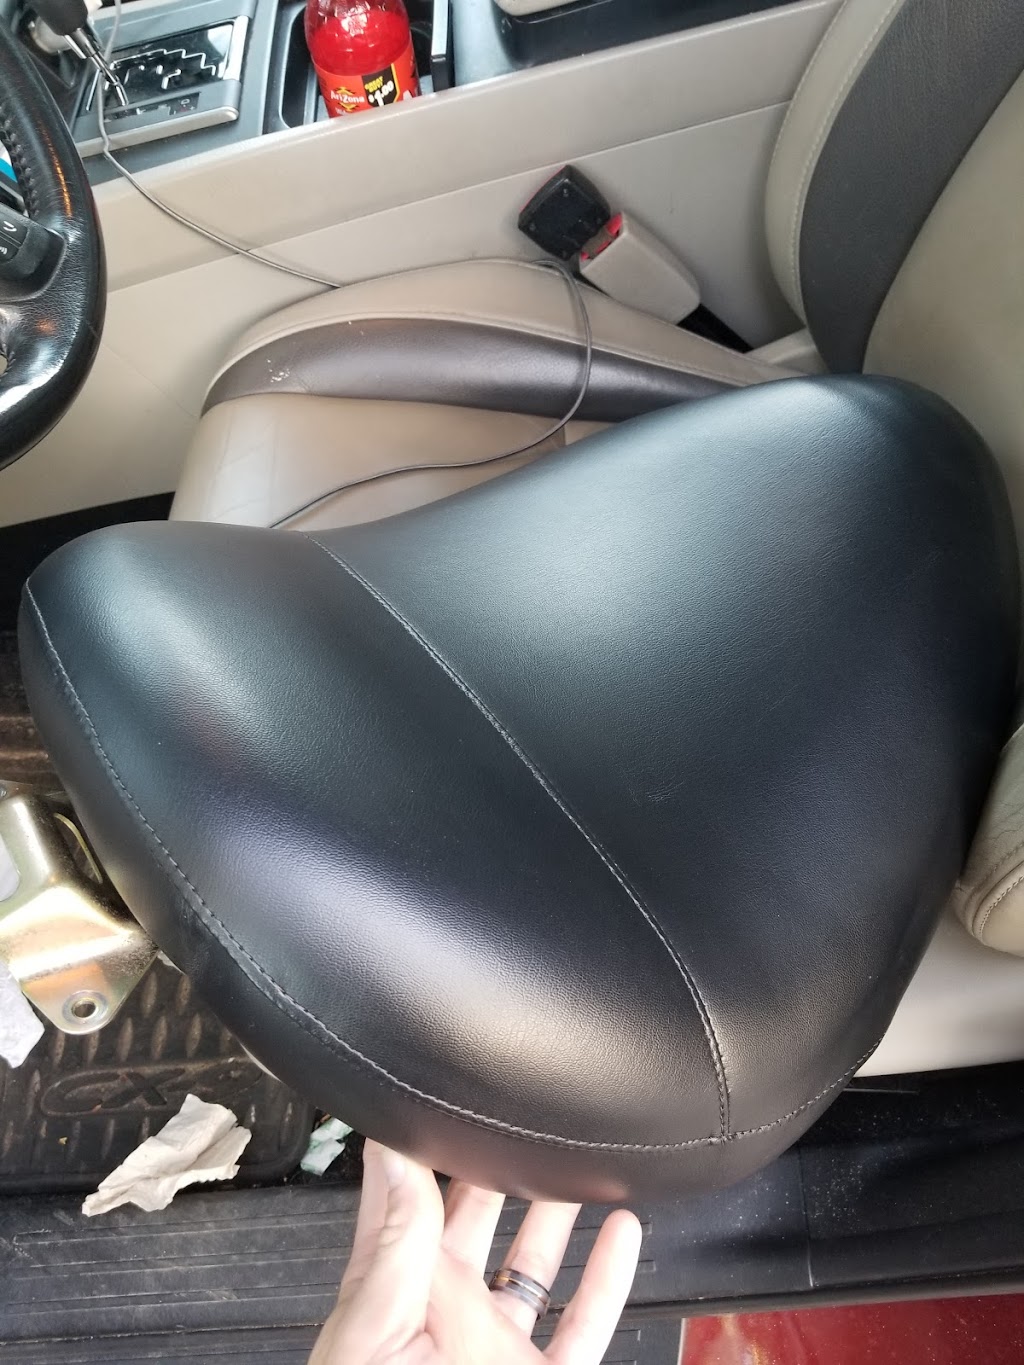 Miller Place Auto Upholstery Inc. | 953 NY-25A, Miller Place, NY 11764 | Phone: (631) 821-7549